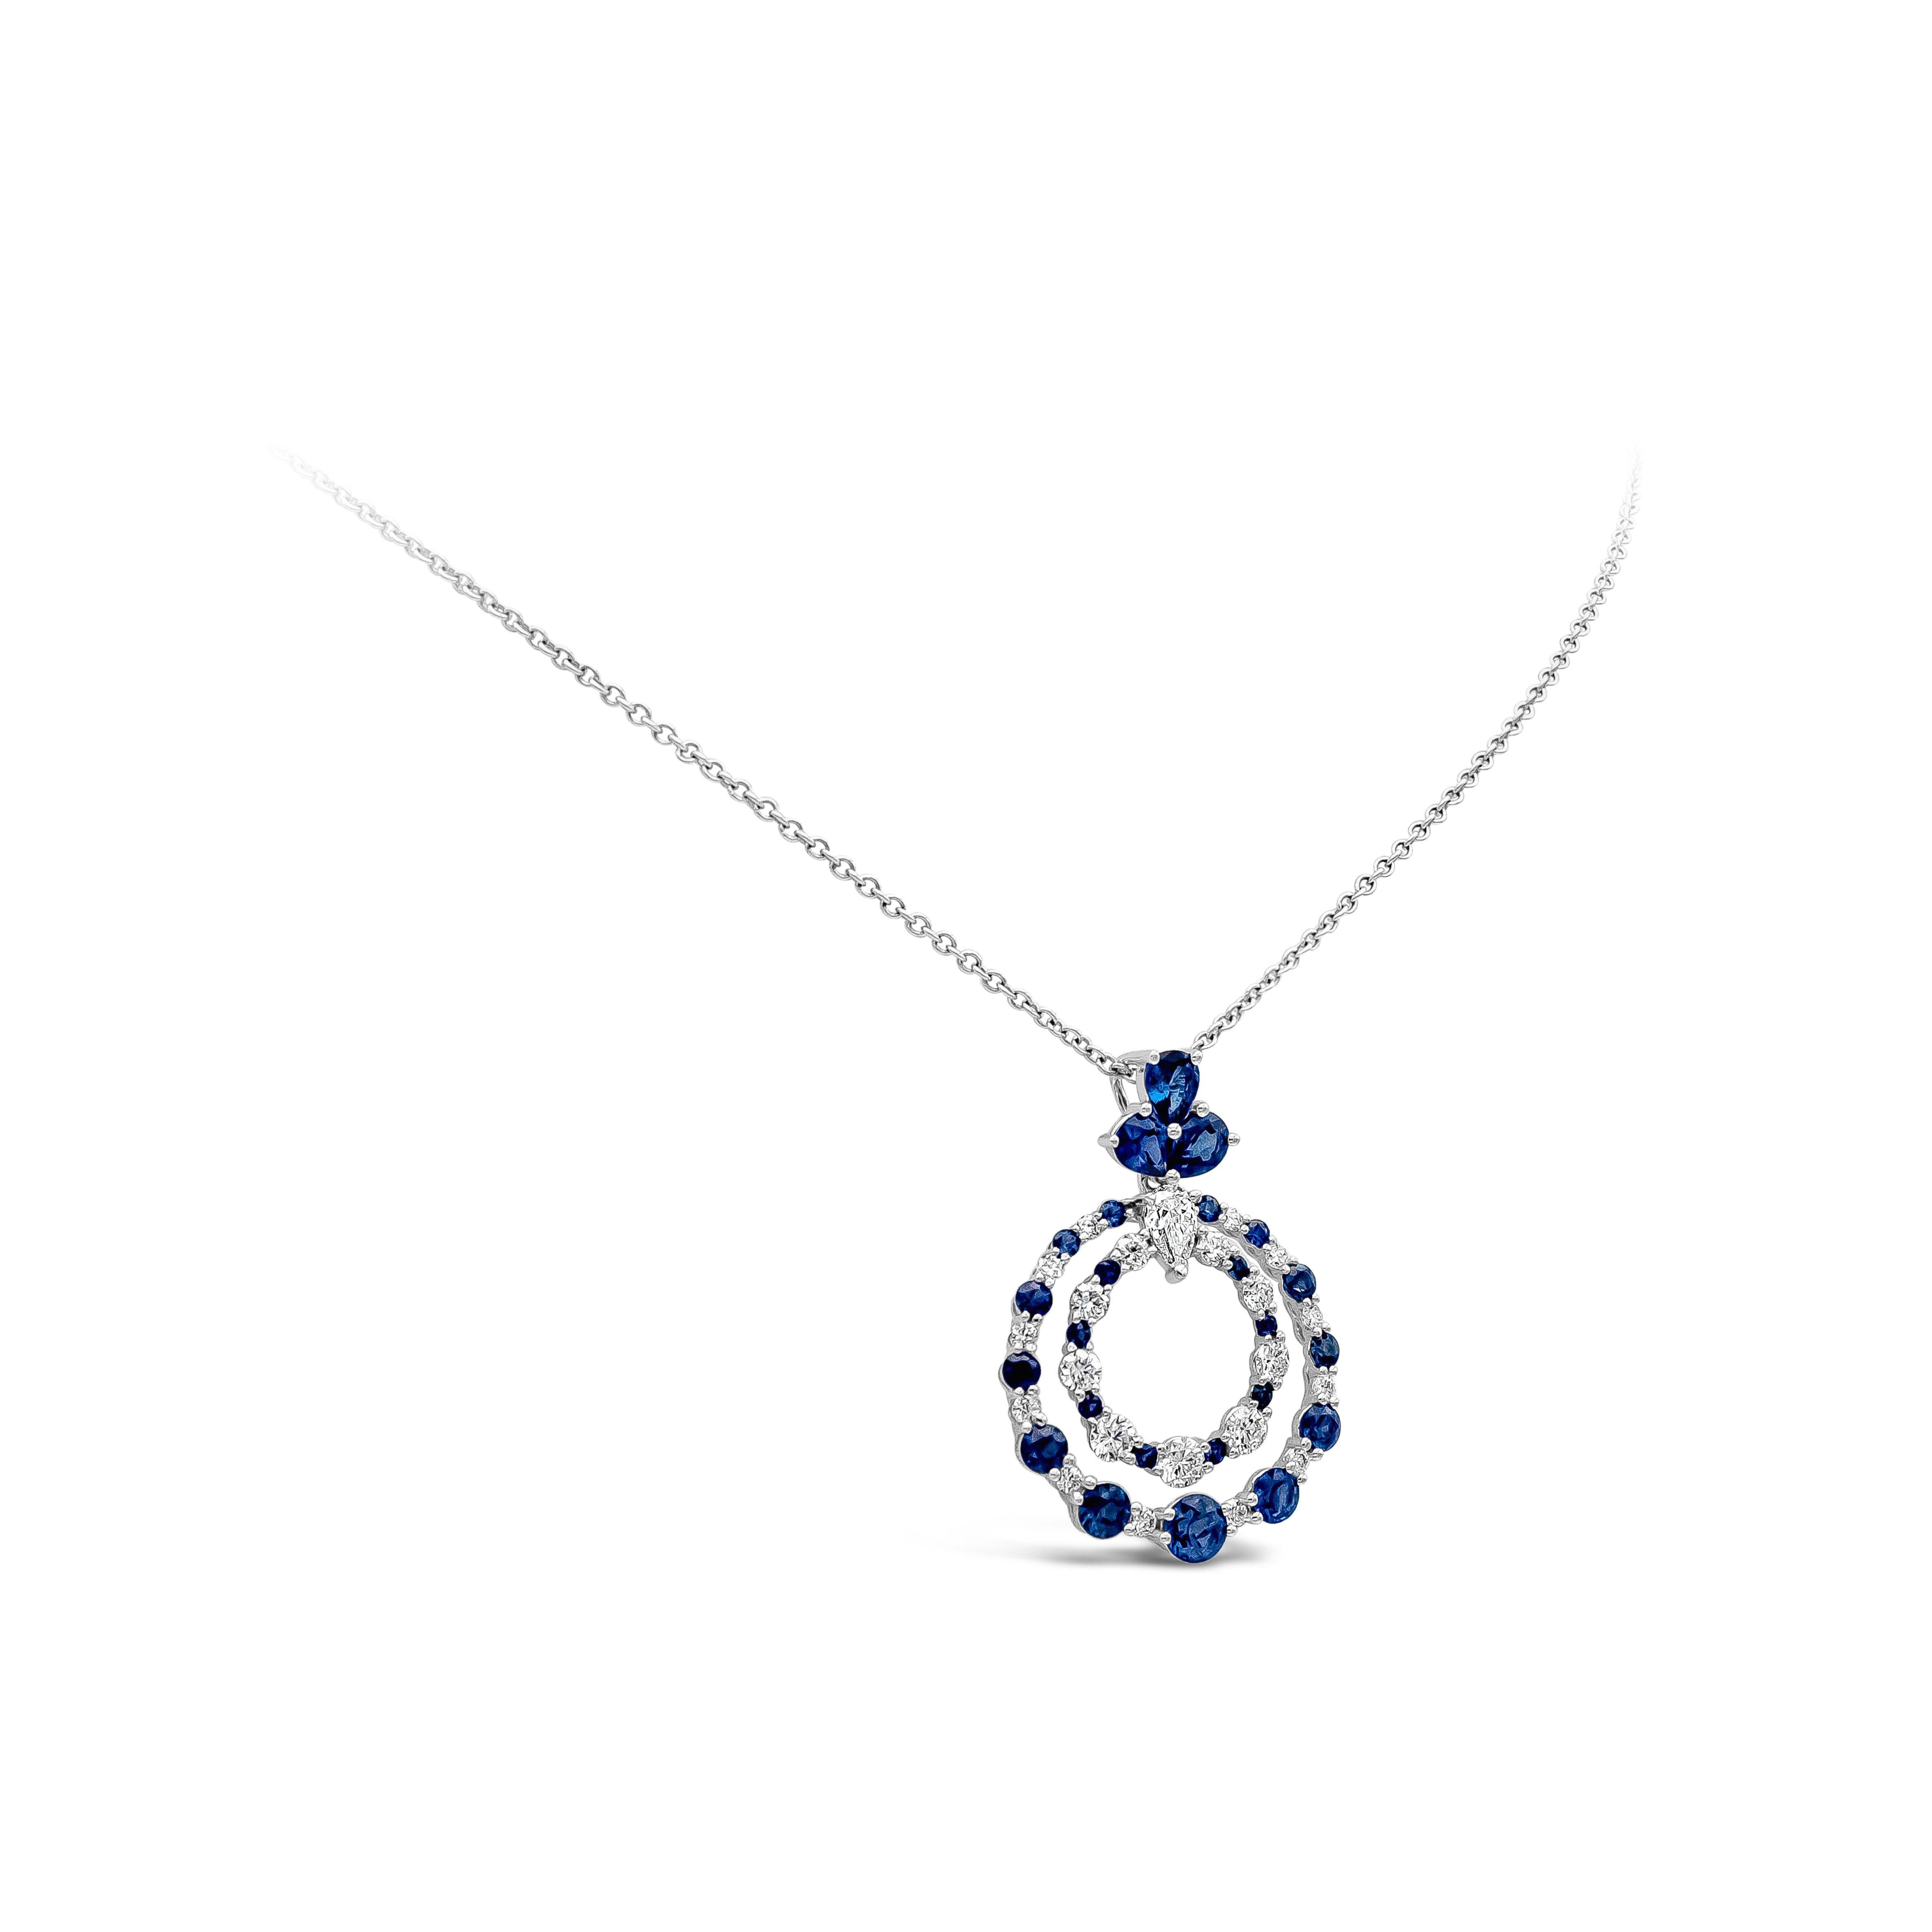 A beautiful and chic pendant necklace showcasing alternating vibrant blue sapphires and round brilliant diamonds, set in an open-work circular design made in 18k white gold. Blue sapphires weigh 1.66 carats total; diamonds weigh 0.72 carats total.